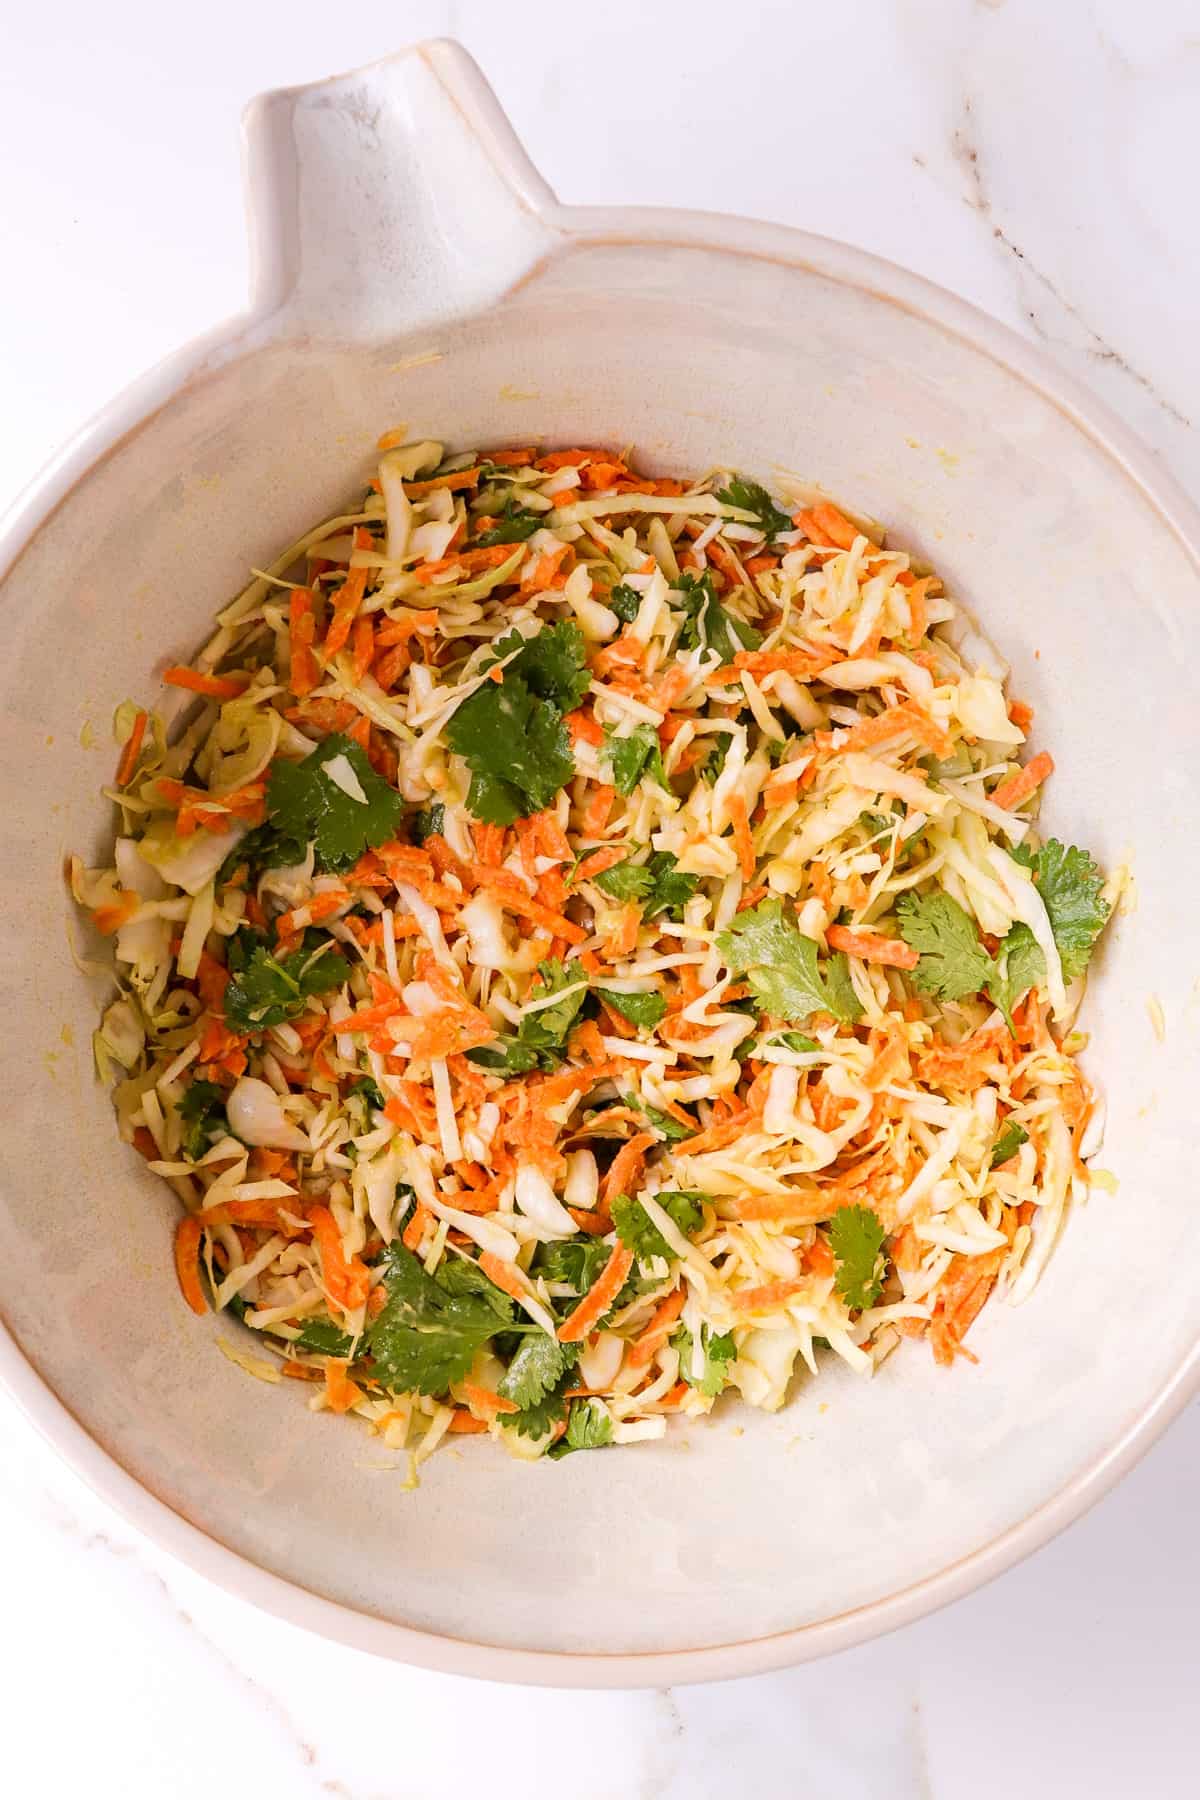 Cabbage and carrot slaw in a mixing bowl.